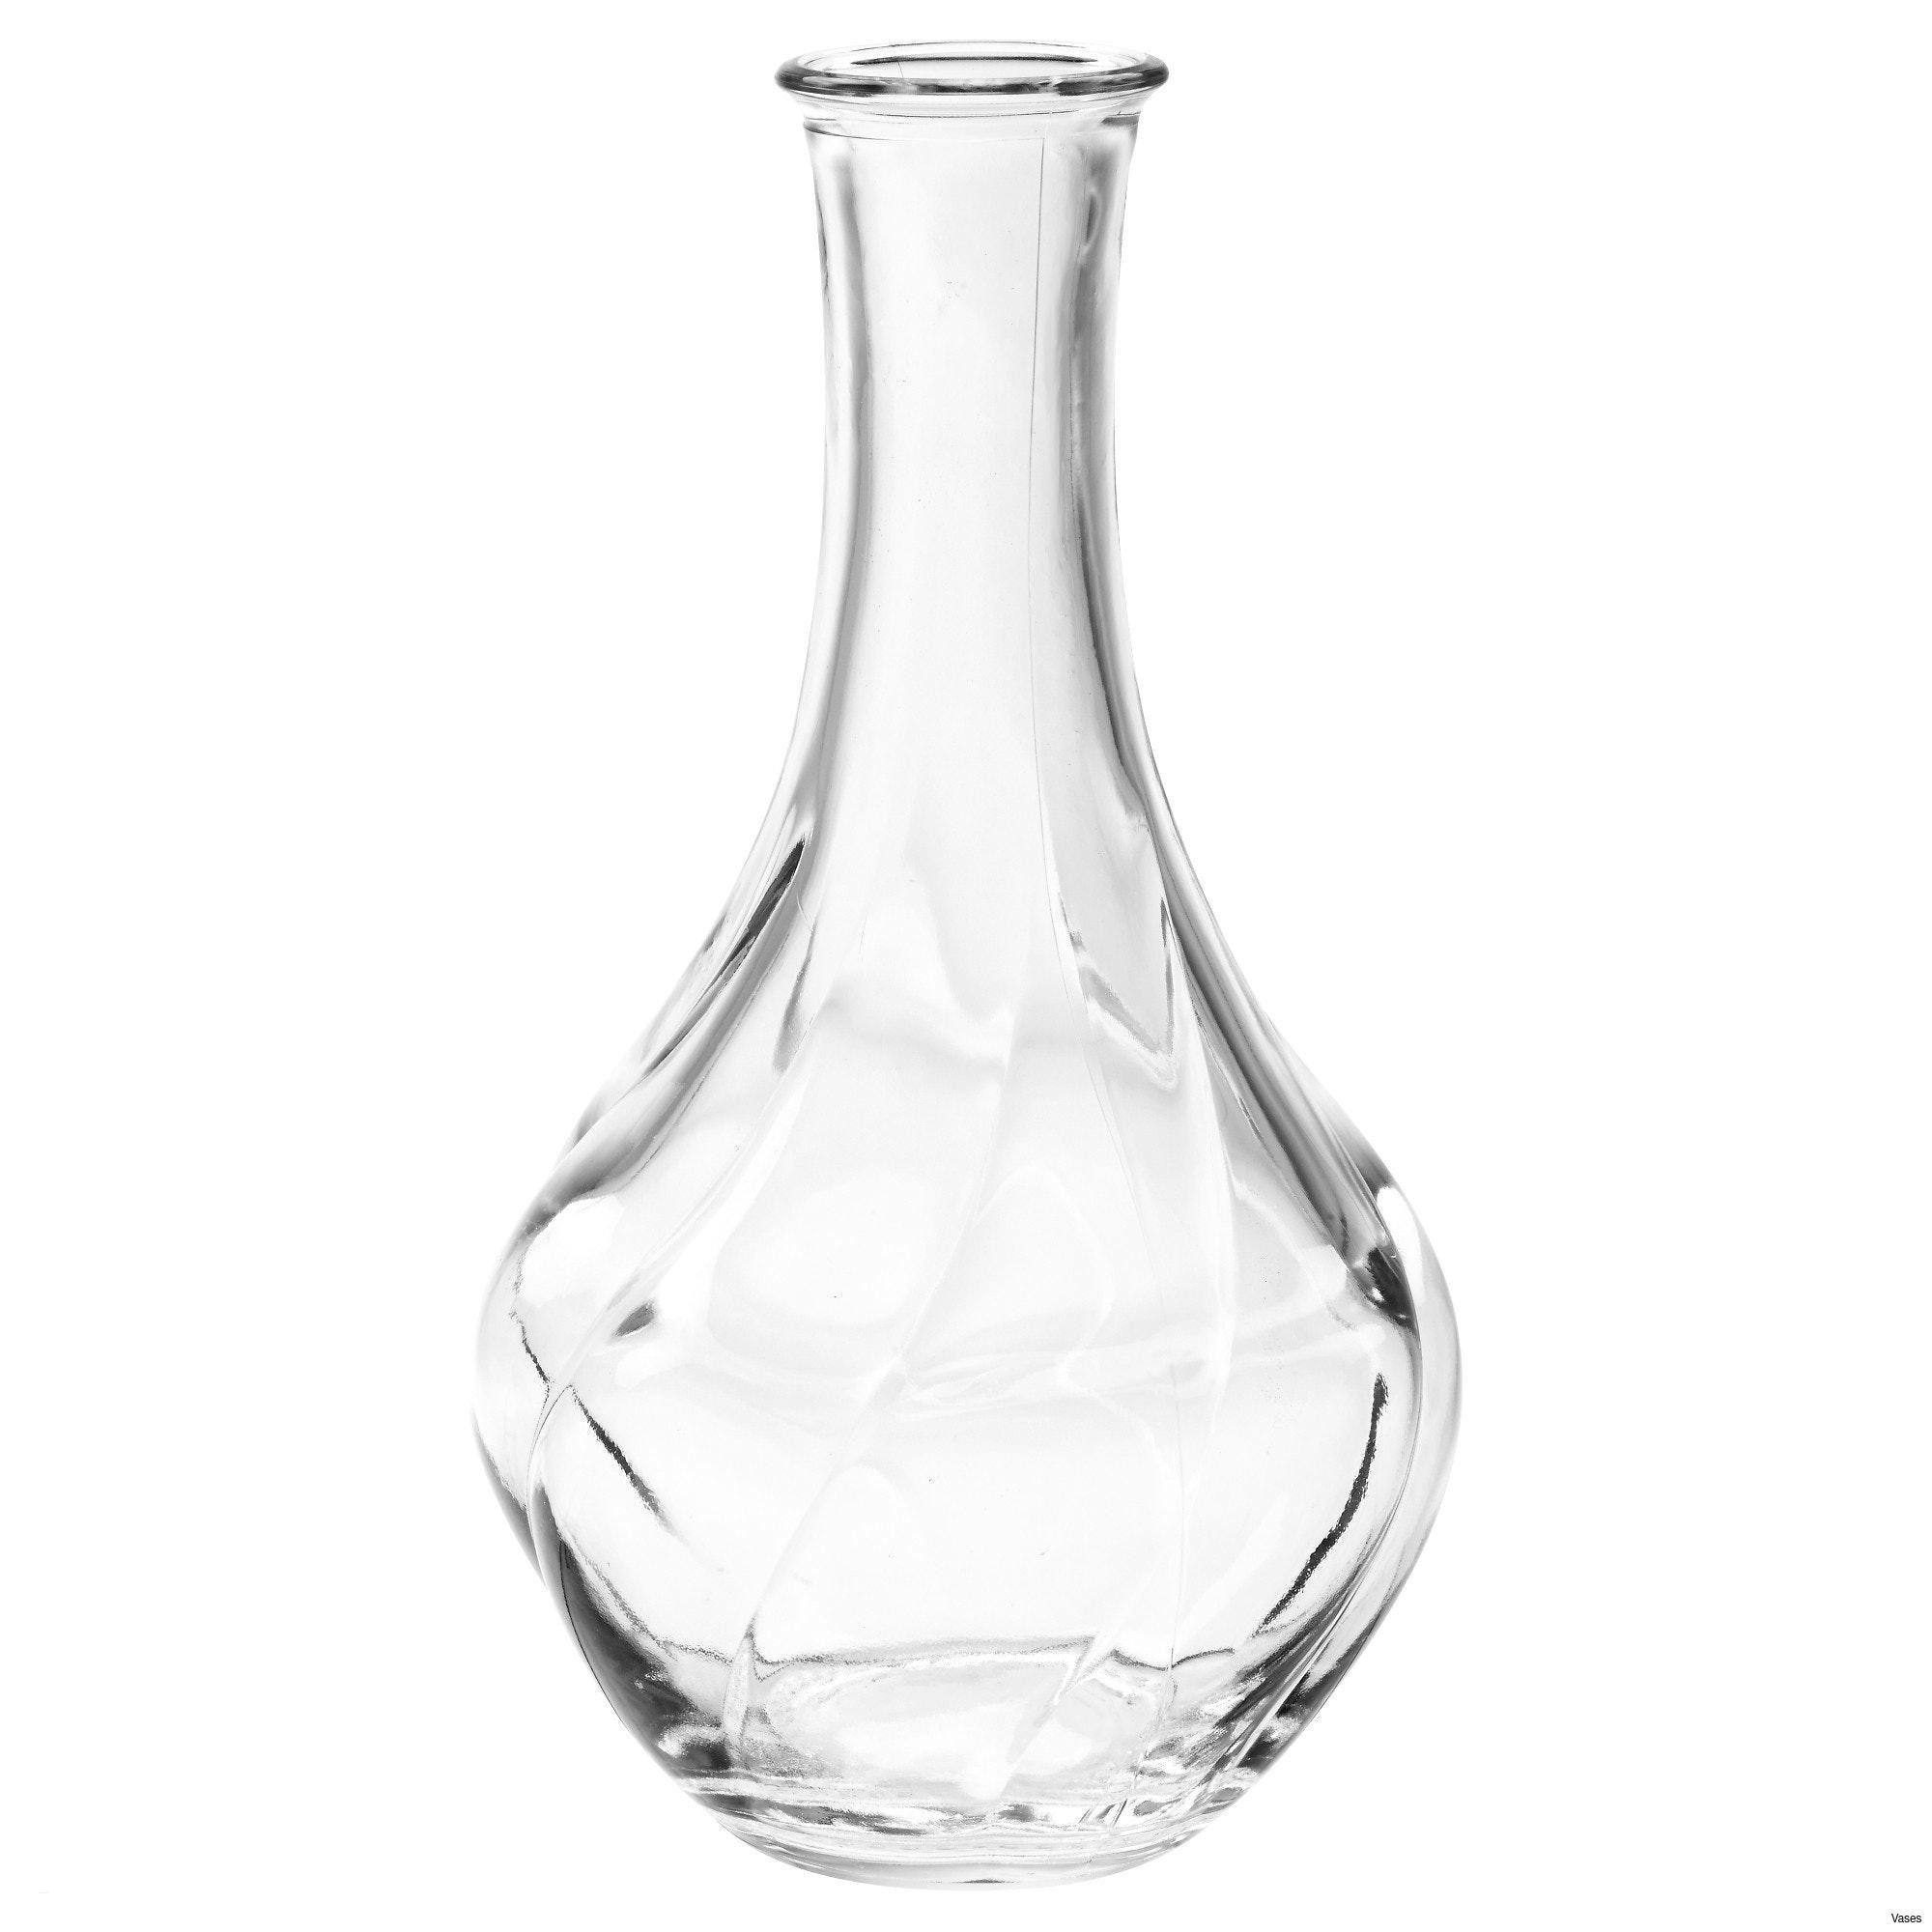 Debi Lilly Vases for Sale Of Black and White Vases Cheap Gallery Silver Wedding Table Decorations within Black and White Vases Cheap Photograph Black and White Living Room Cool Living Room Glass Vases